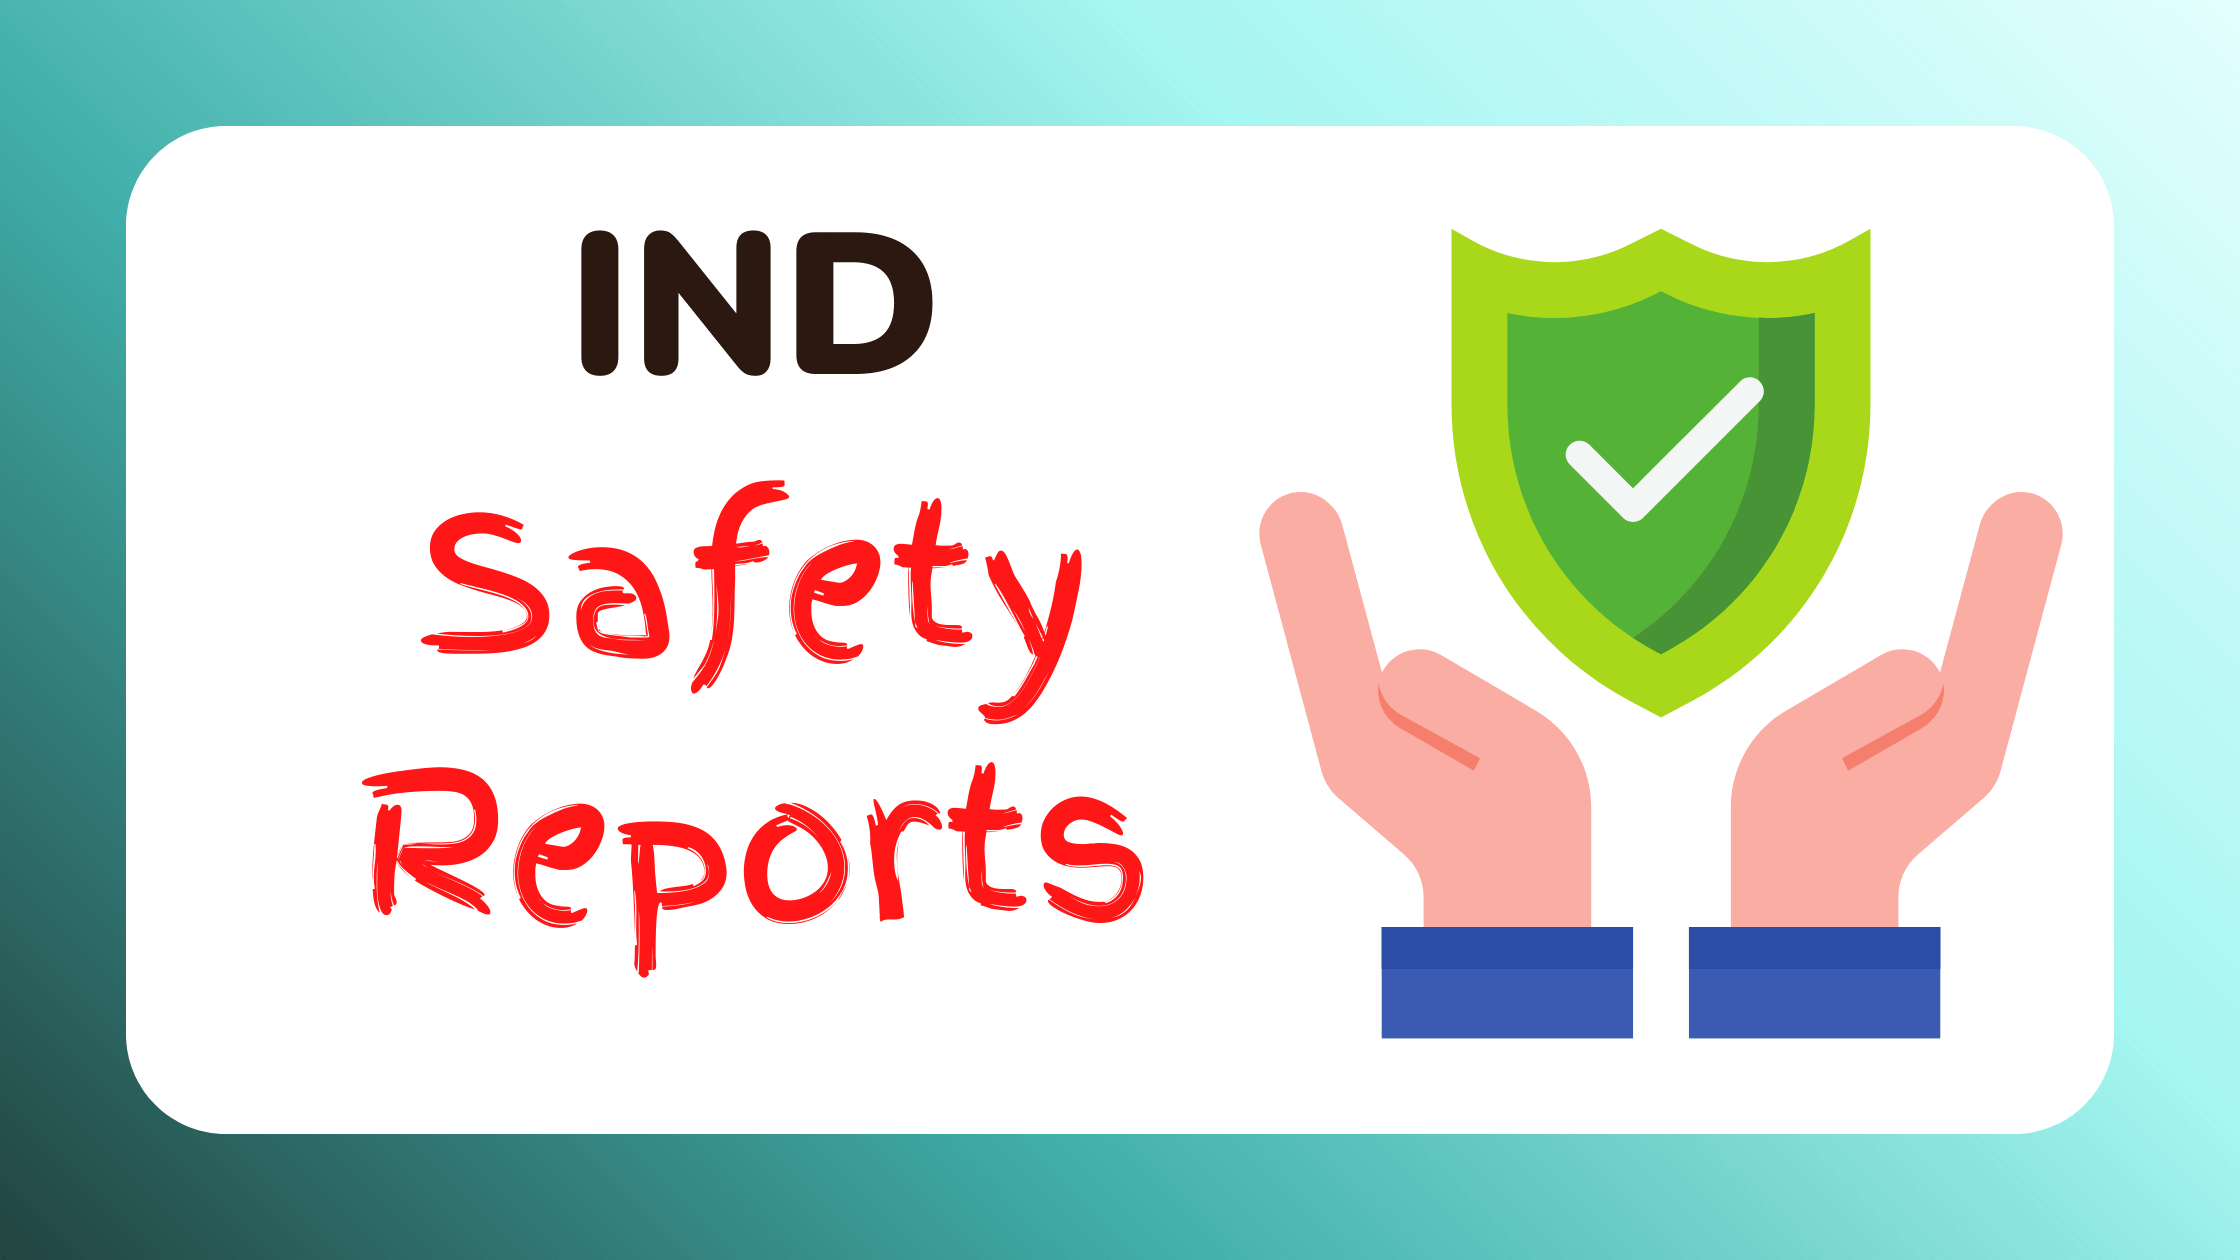 IND Safety Reports